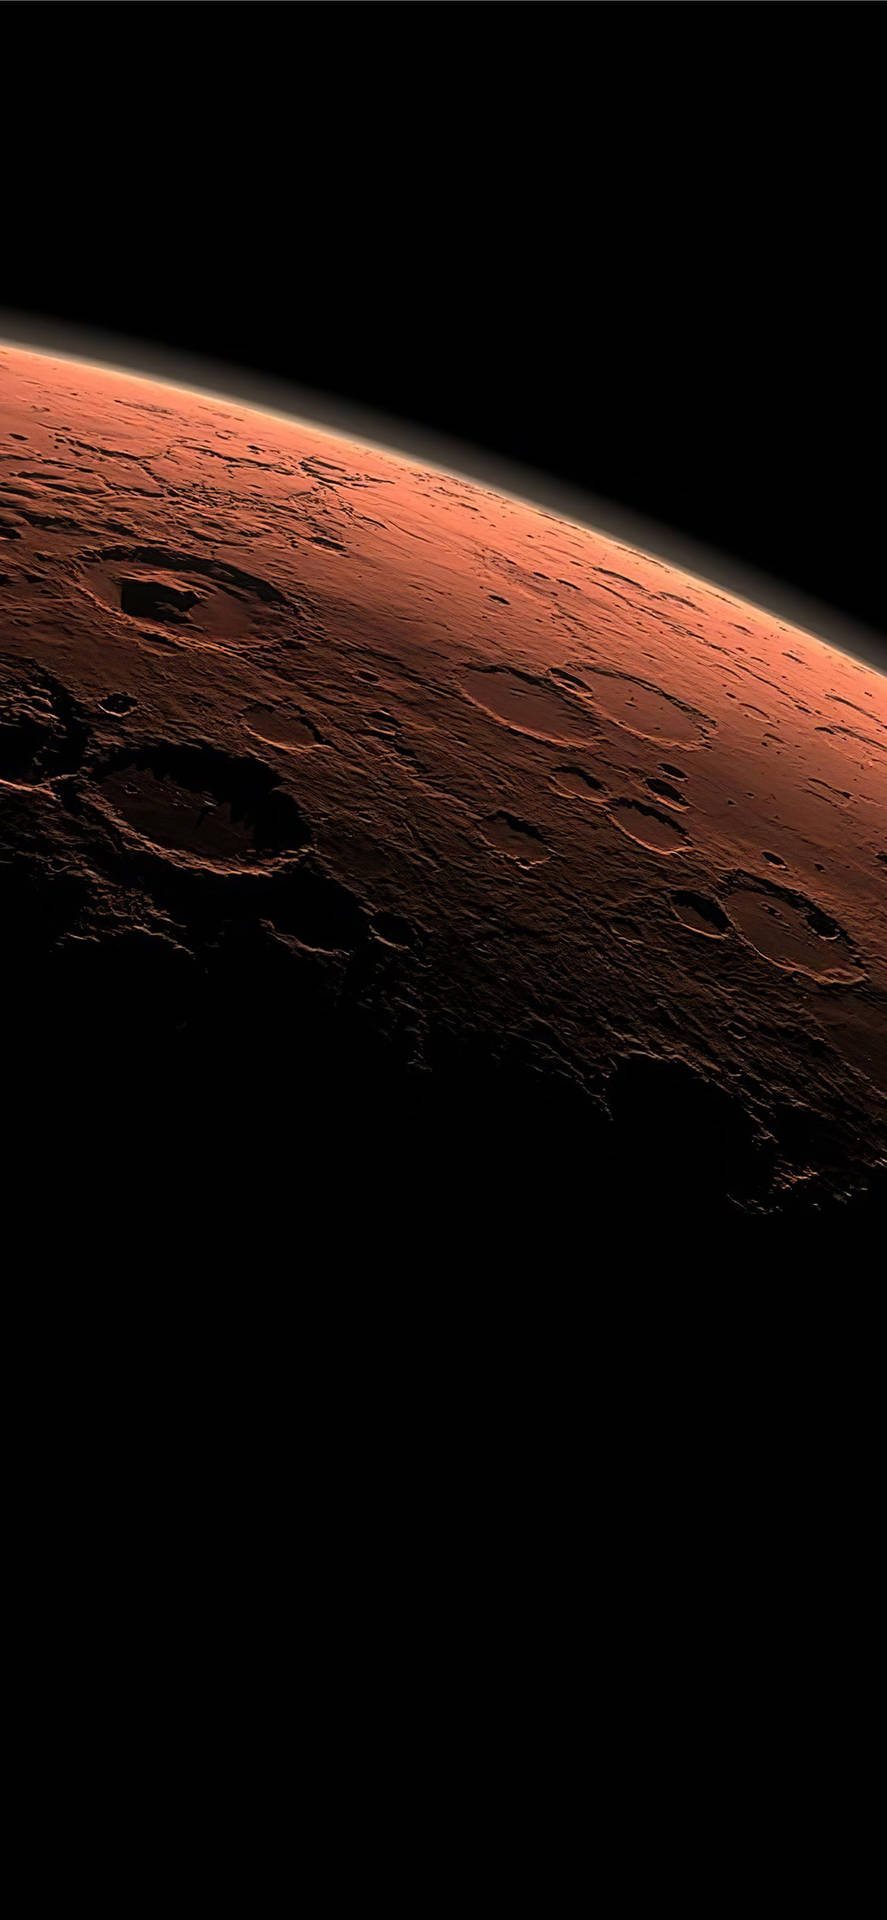 Get the Latest Mars IPhone Wallpaper